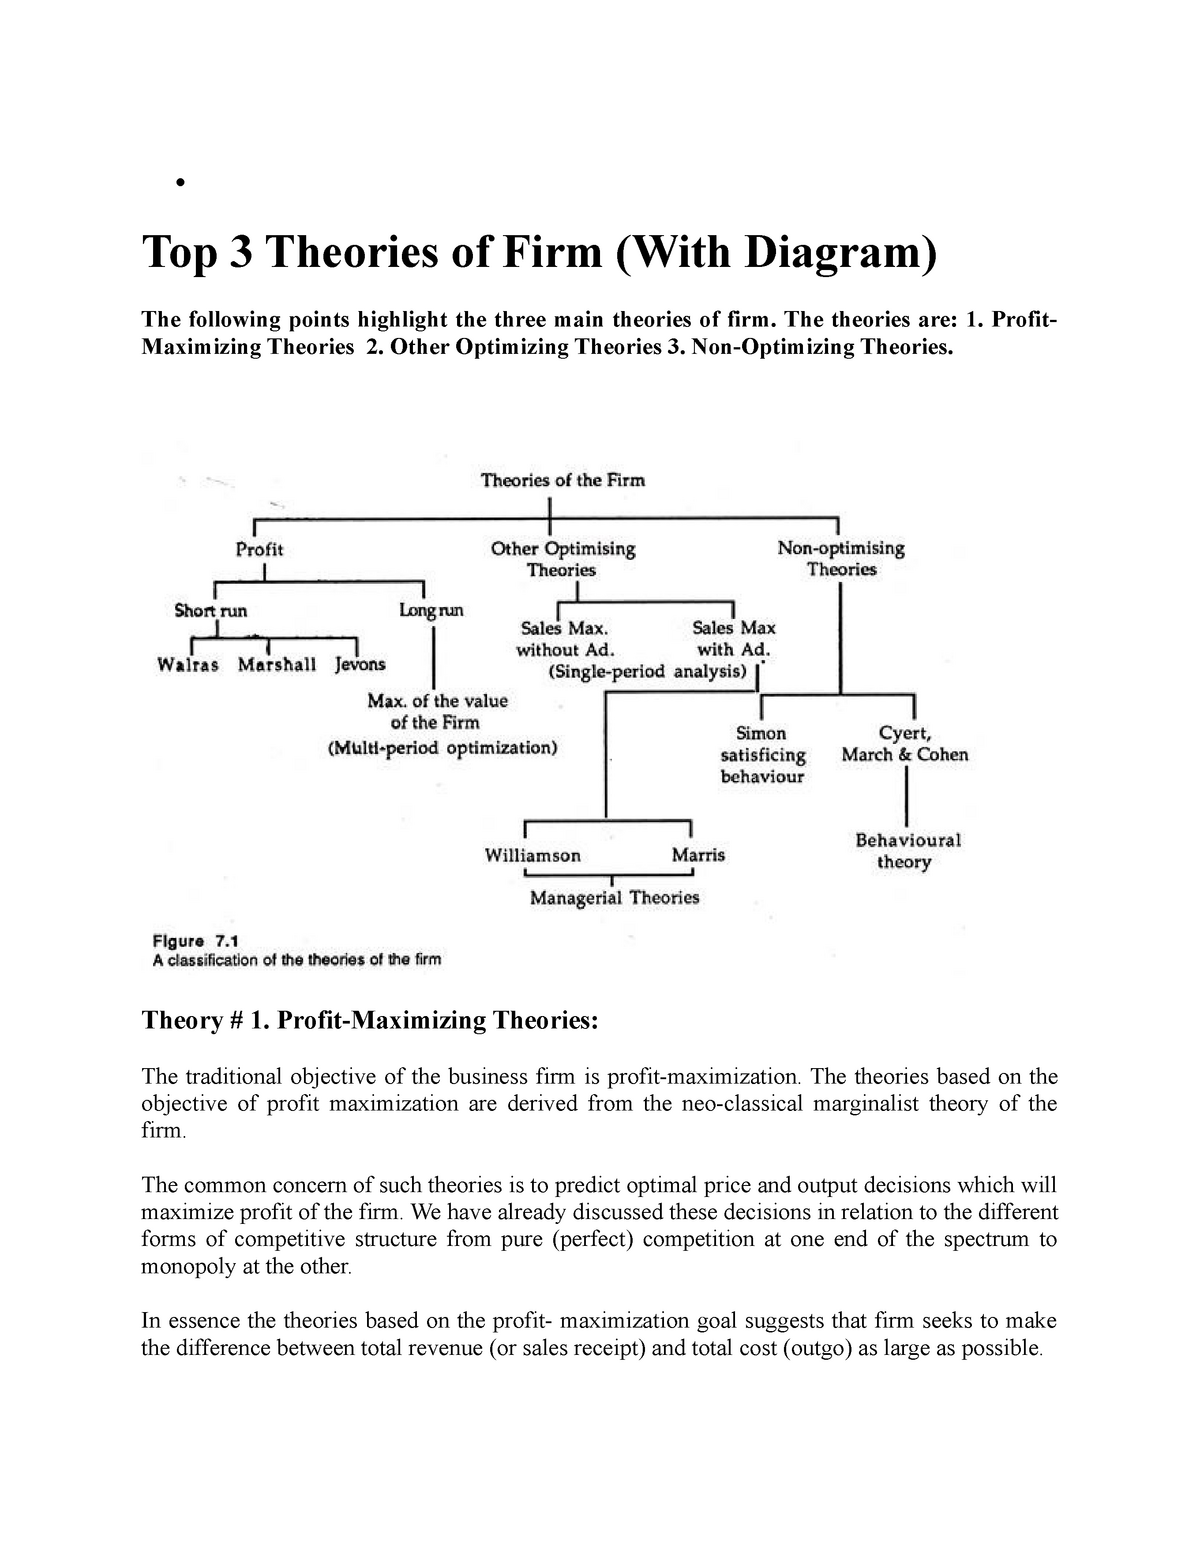 literature review theory of the firm